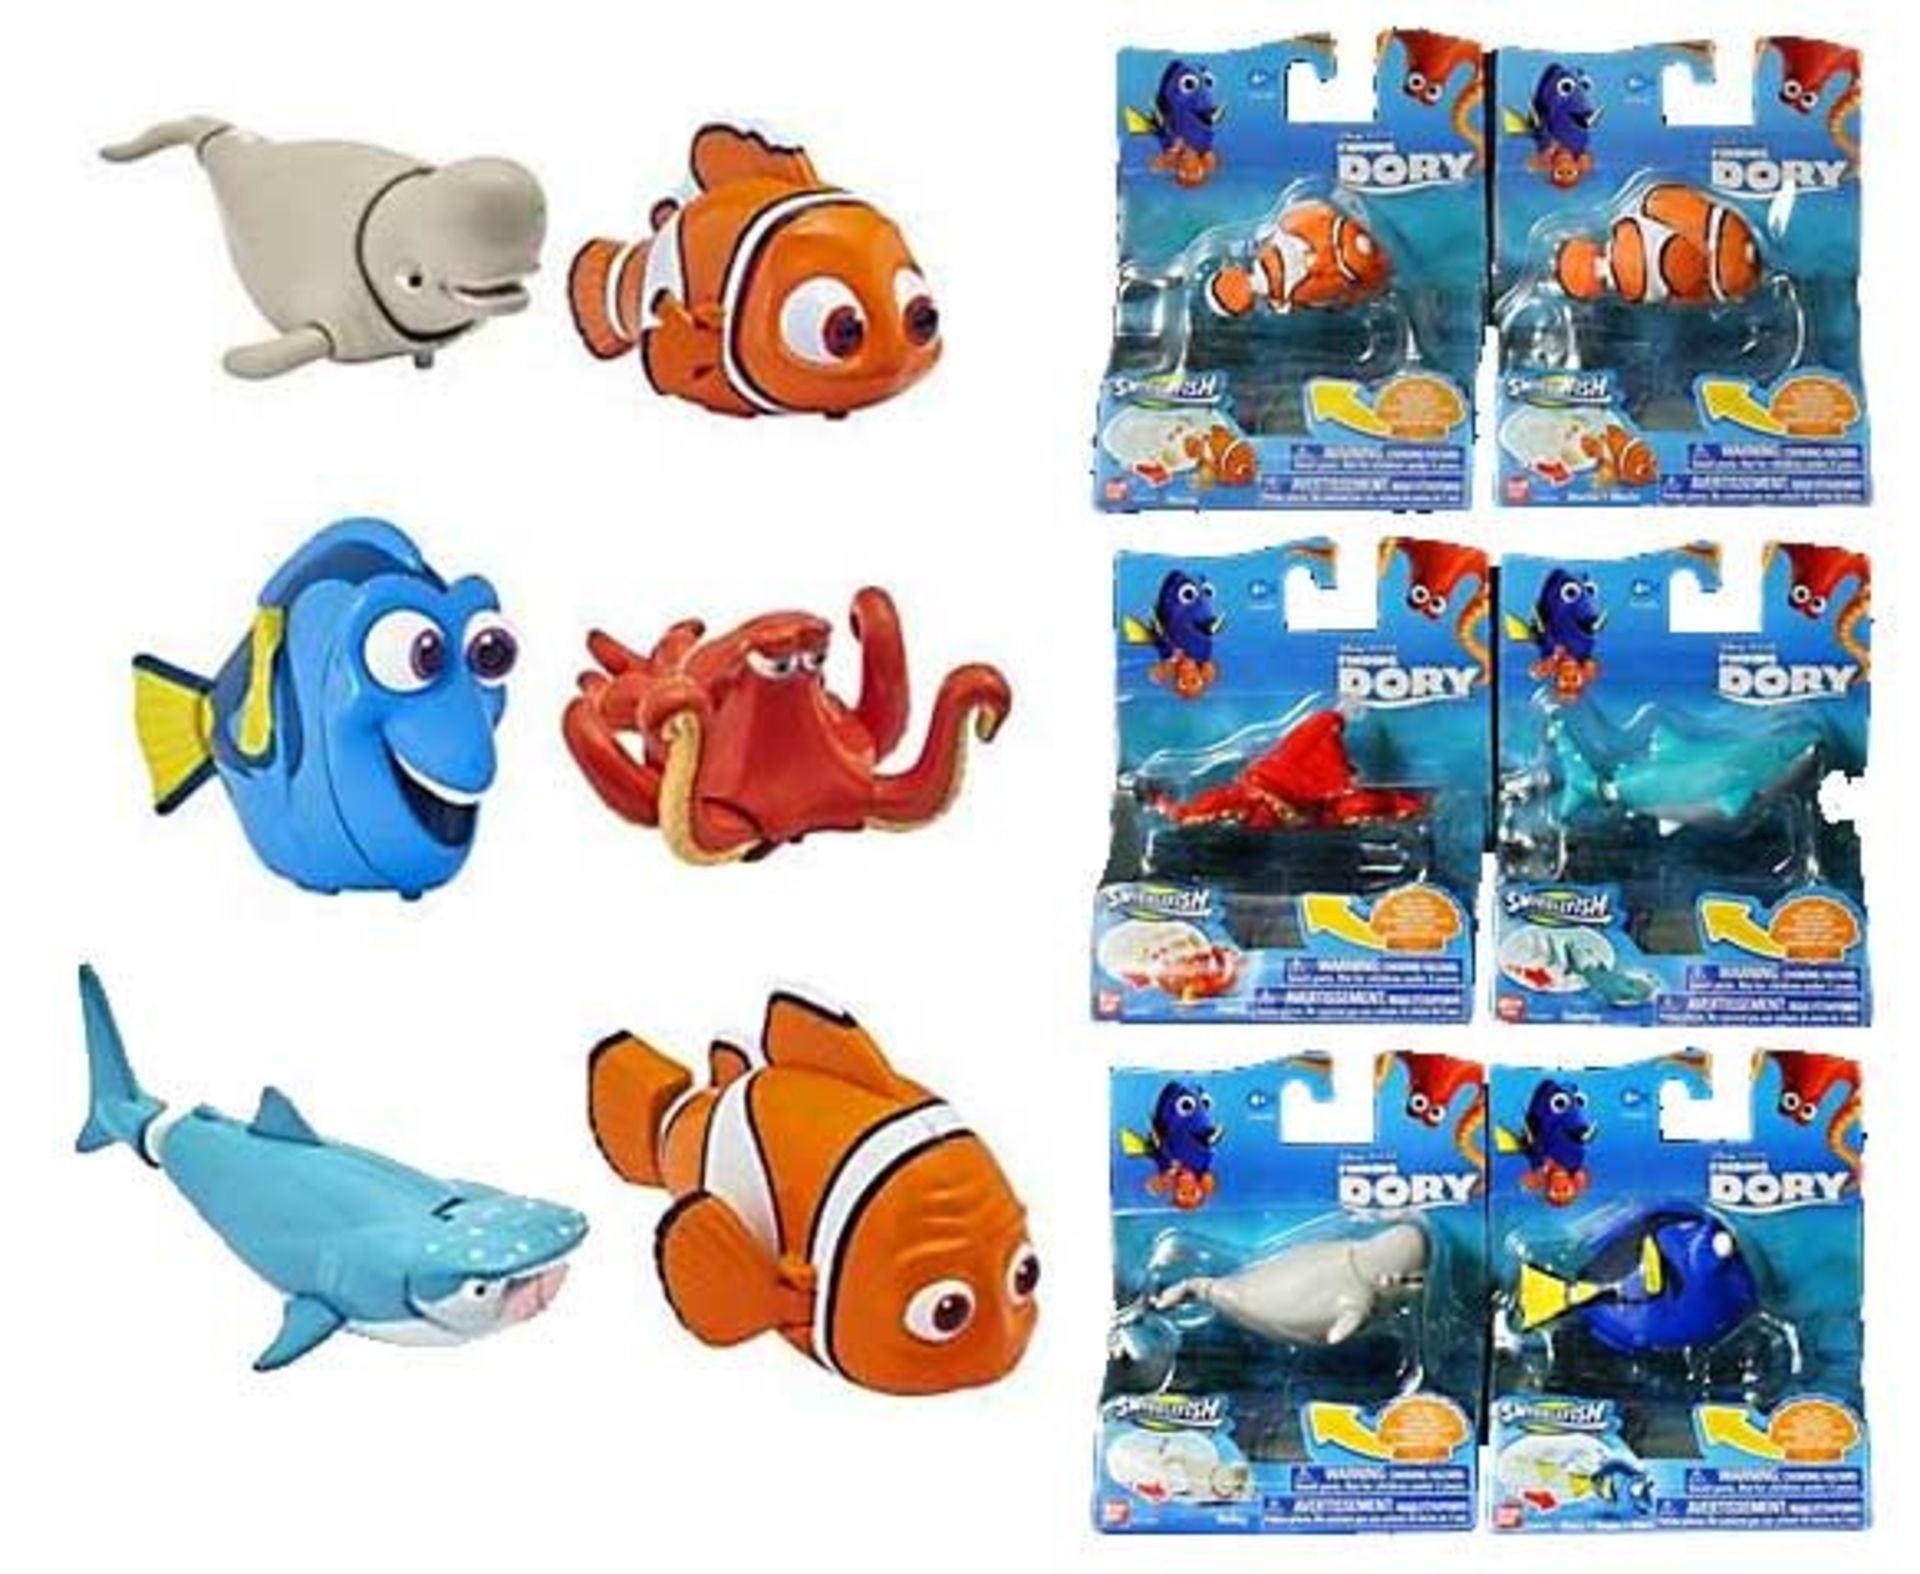 20pcs Brand new Sealed assorted Finding Dory Squiggle Fish - Assorted designs - 20pcs in lot